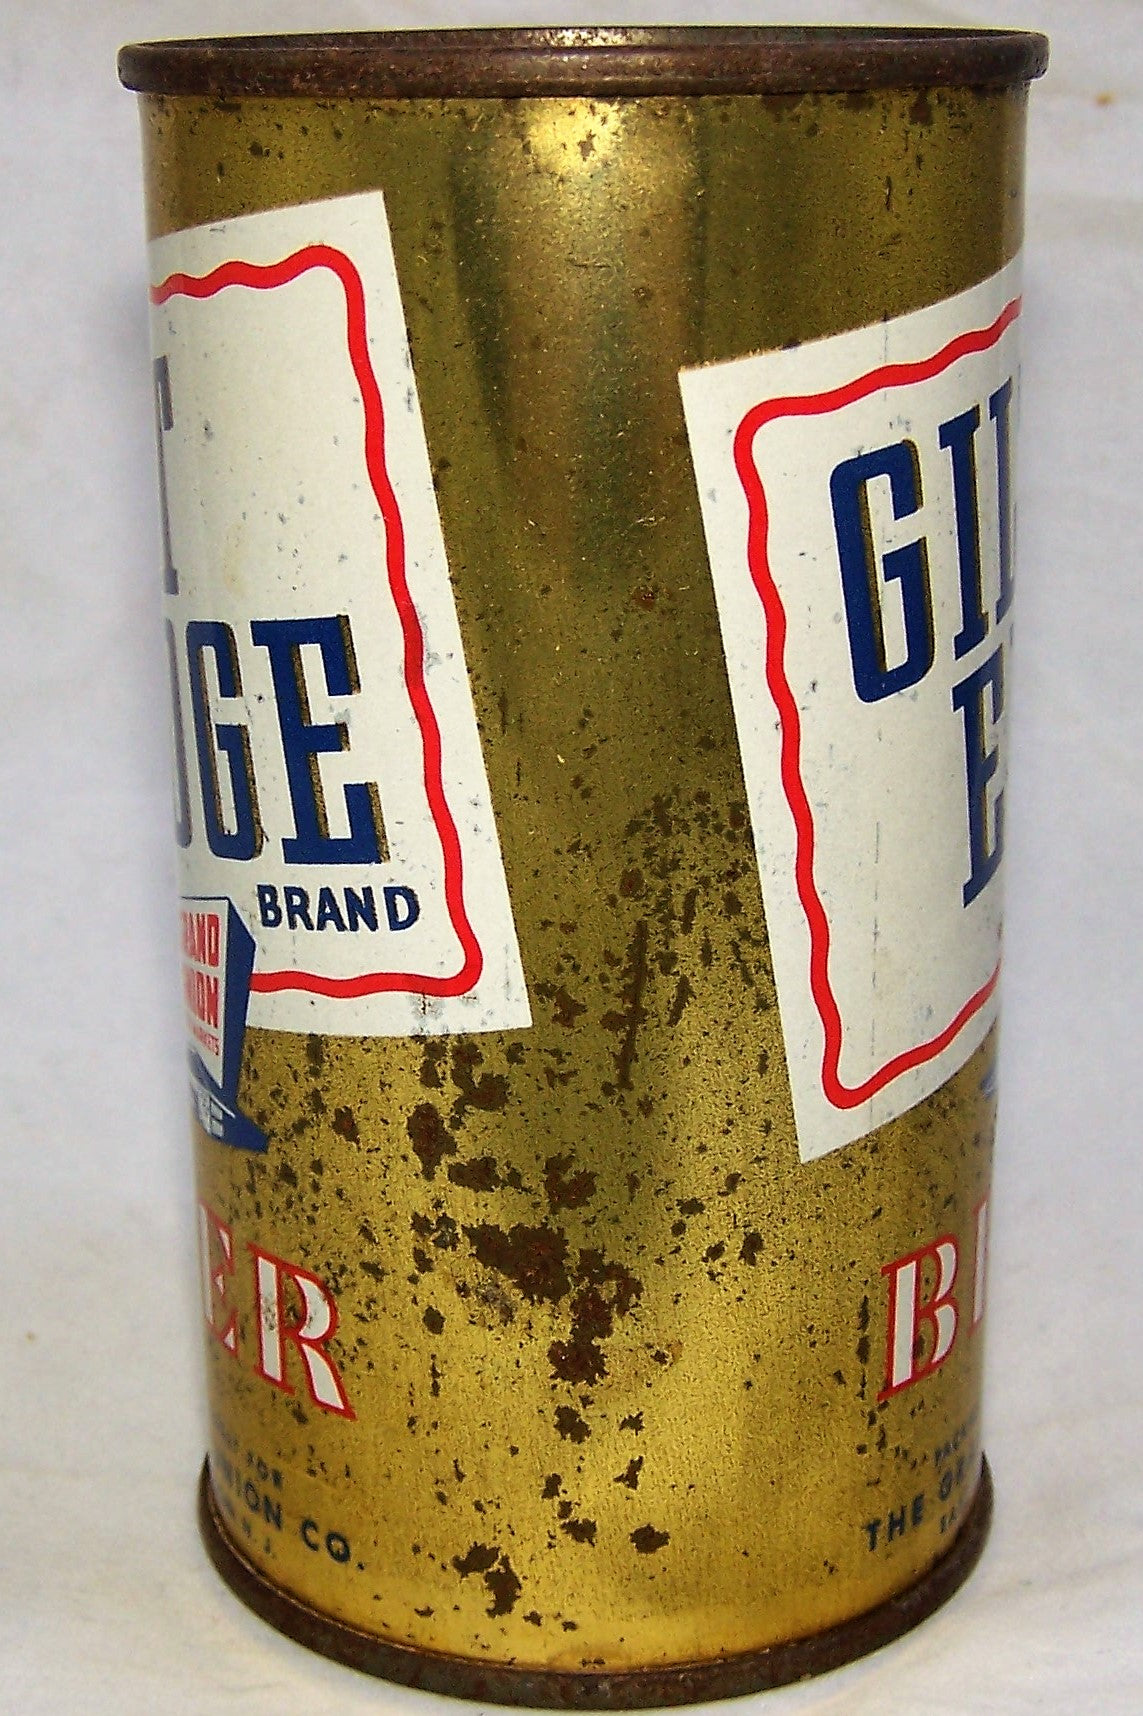 Gilt Edge from New Jersey, Indoor can with humidity